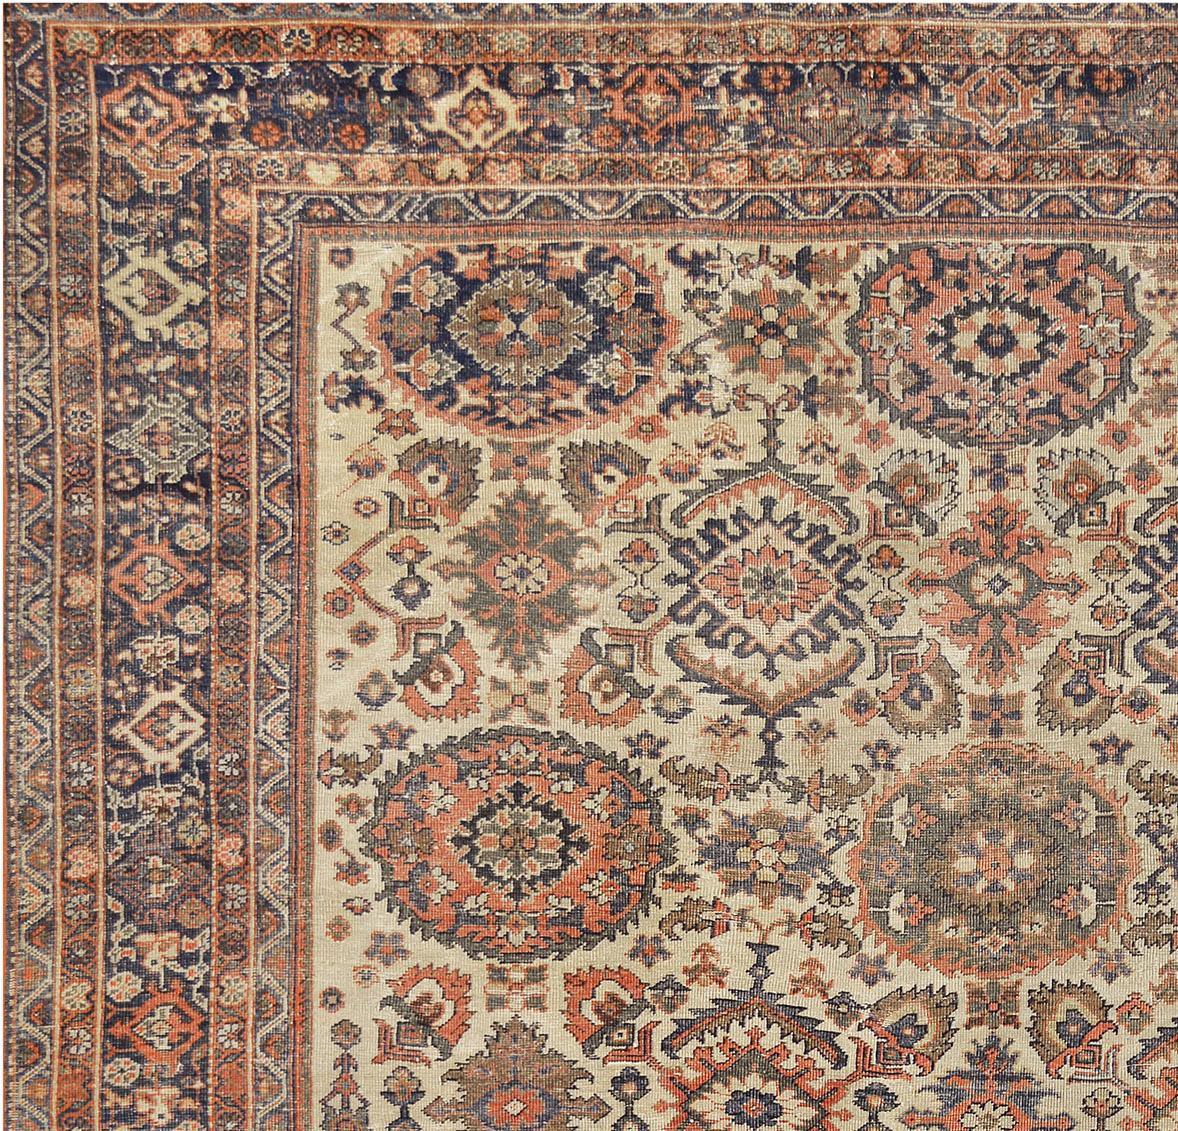 Hand-Woven Wool Sultanabad Rug Circa Late 19th Century In Good Condition For Sale In West Hollywood, CA